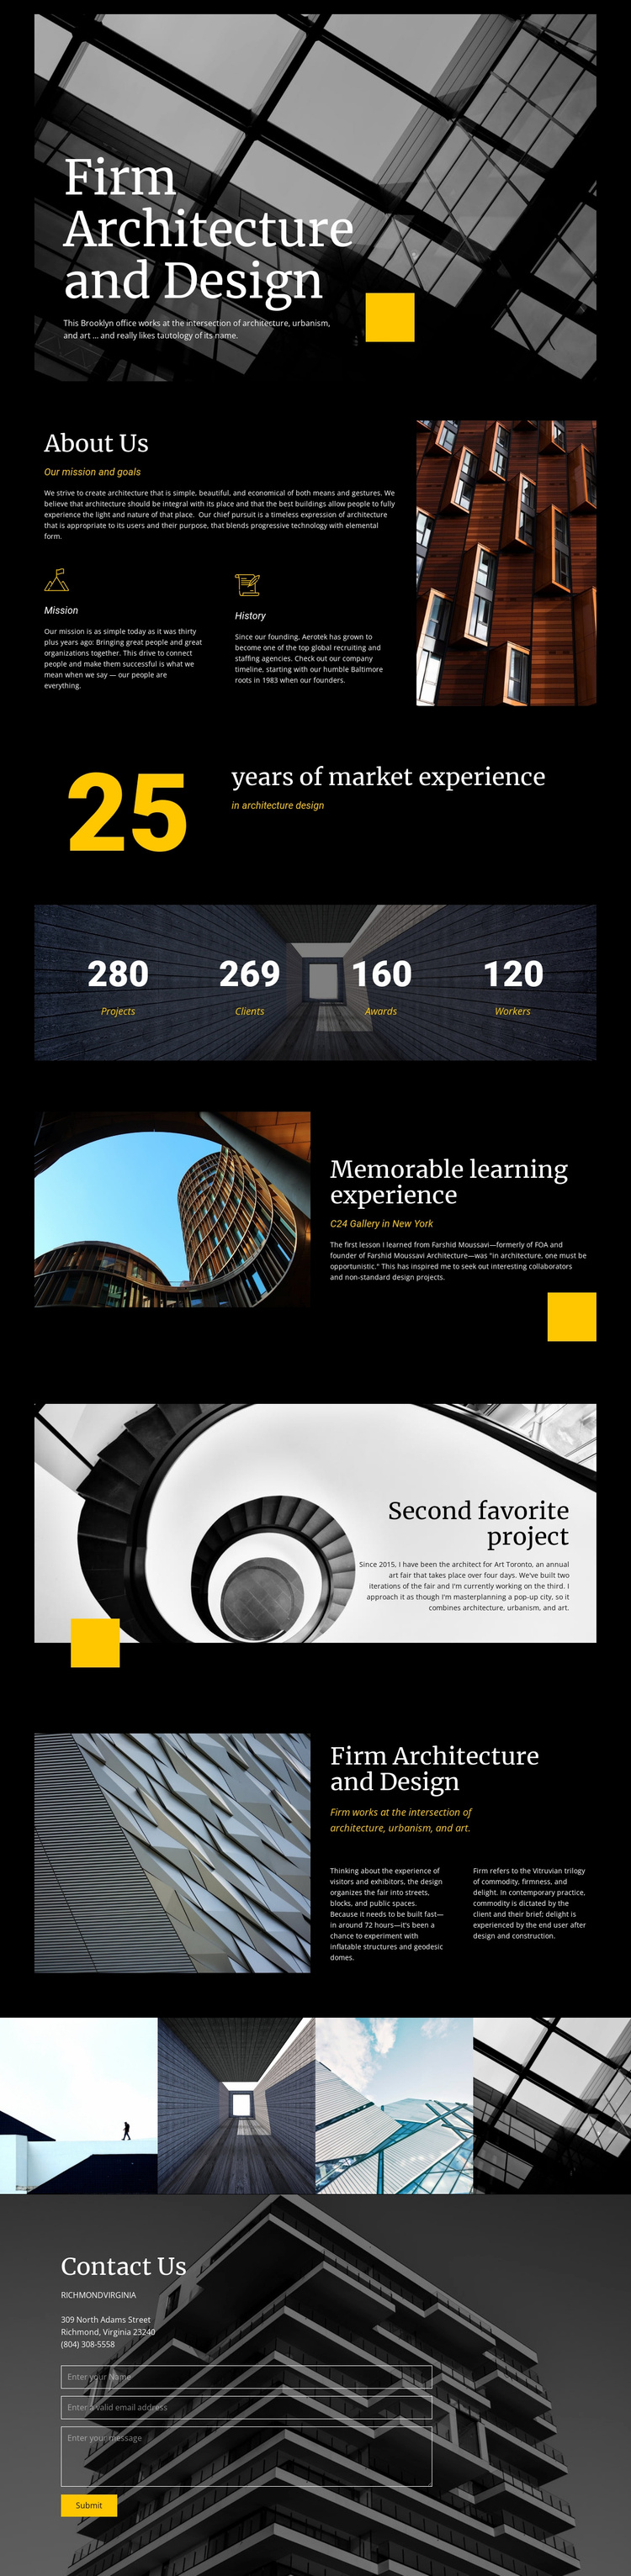 Firm architecture and Design Landing Page